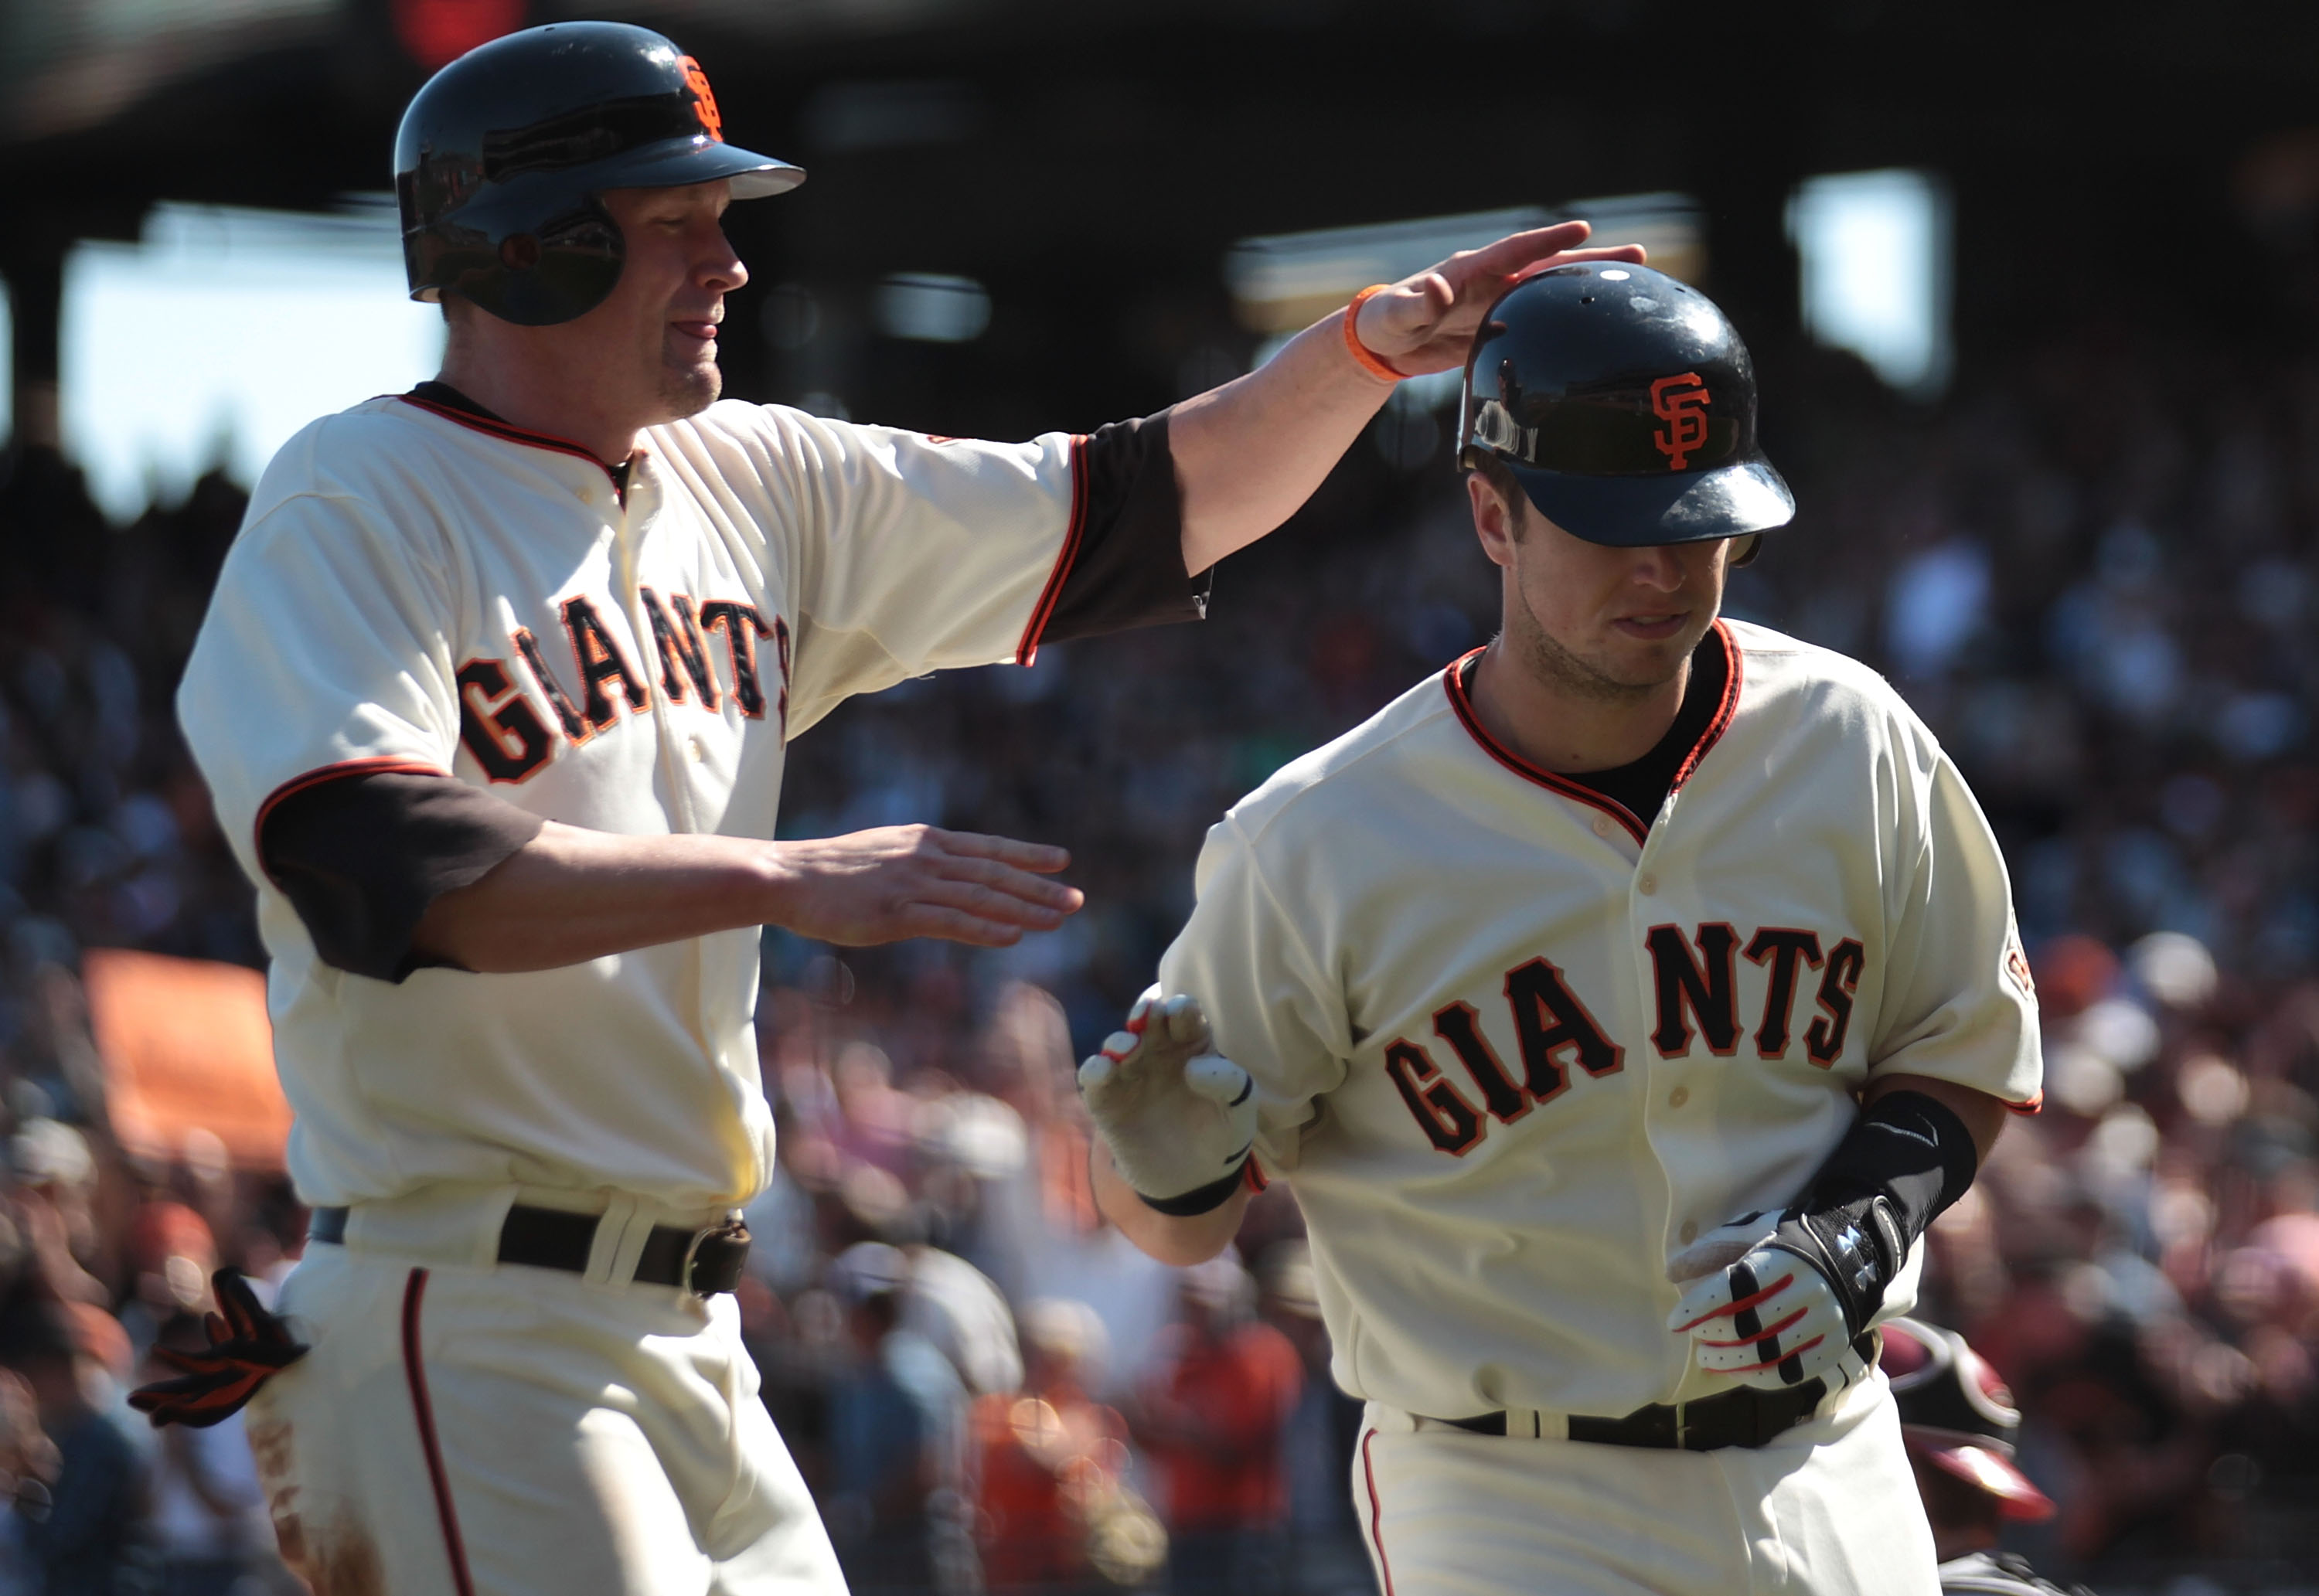 SAN FRANCISCO - SEPTEMBER 30:  Buster Posey #28 of the San Francisco Giants celebrates with Aubrey Huff #17 after hitting a two run home run in sixth inning against the Arizona Diamondbacks during a Major League Baseball game at AT&T Park on September 30,